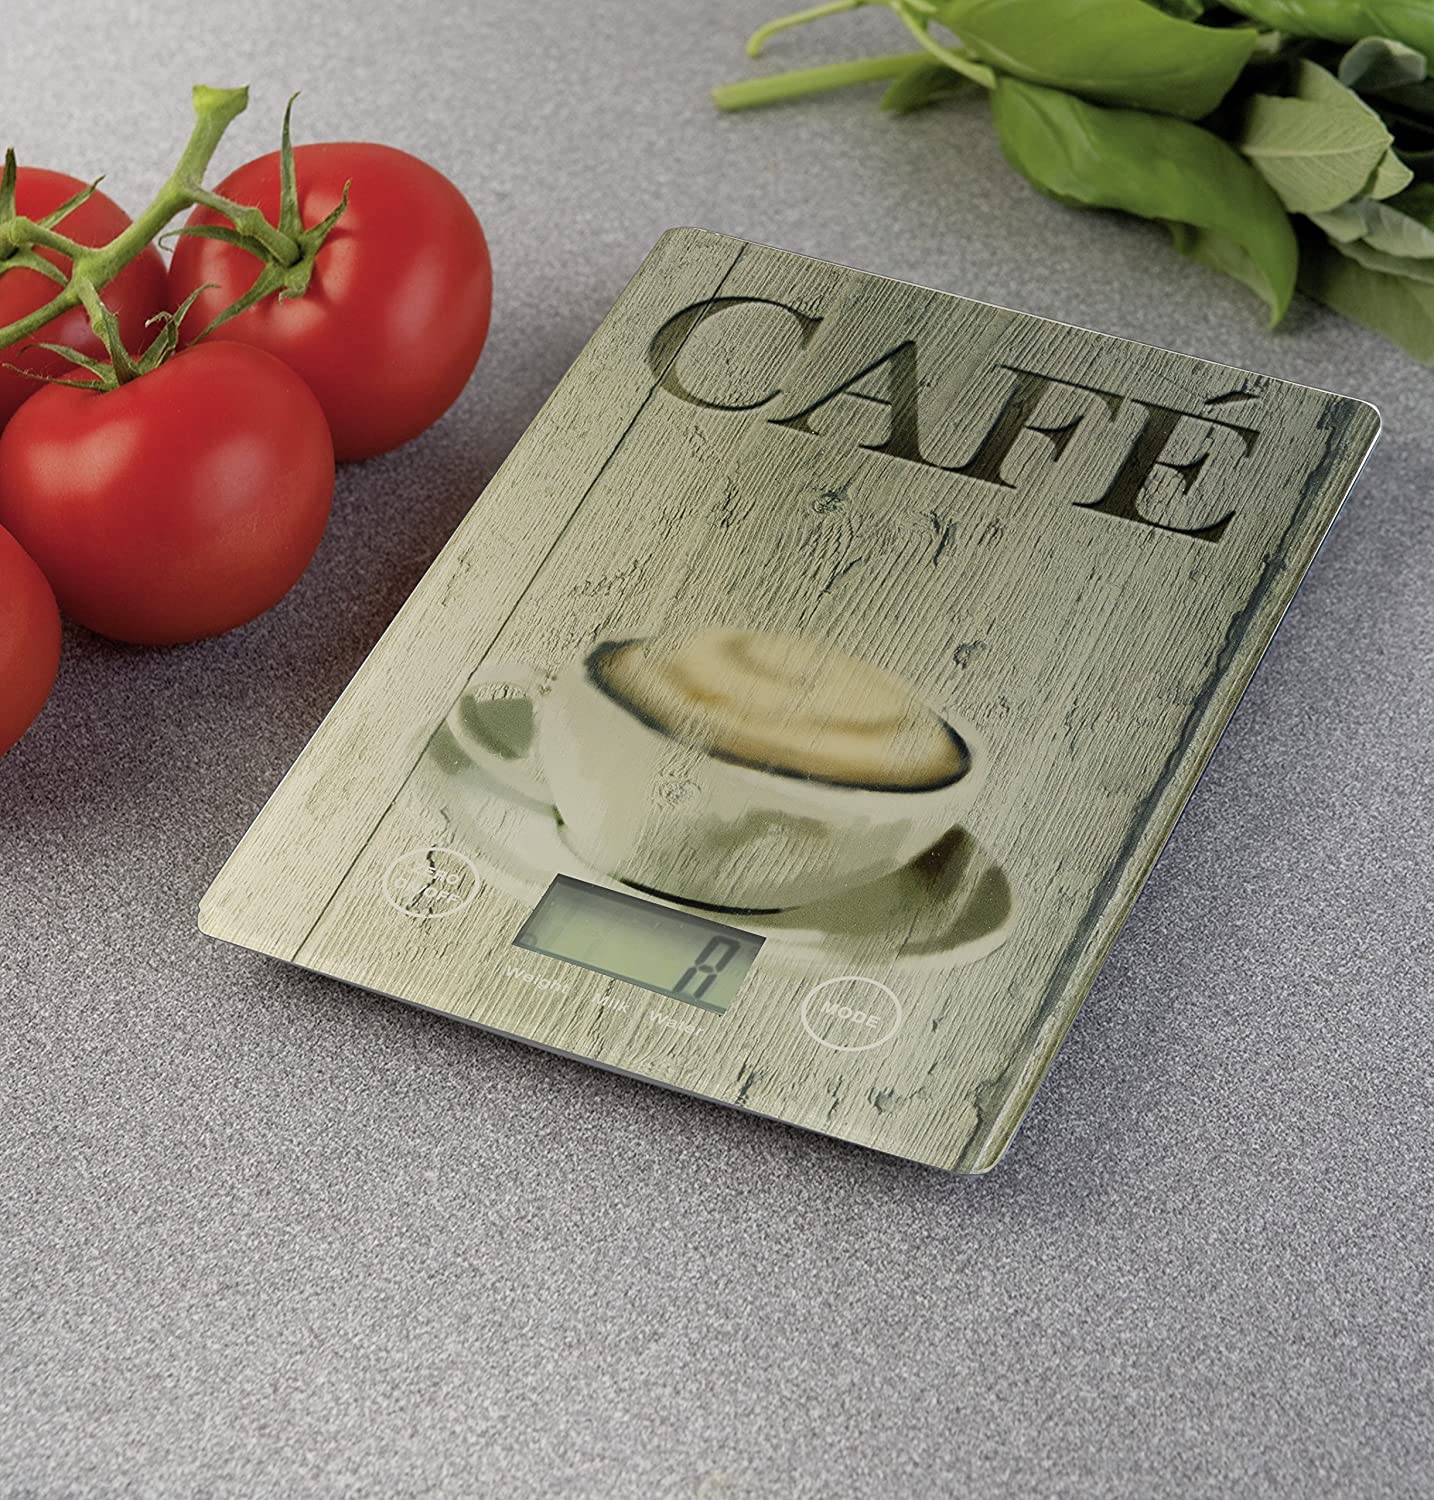 Kitchen Scale Cafe